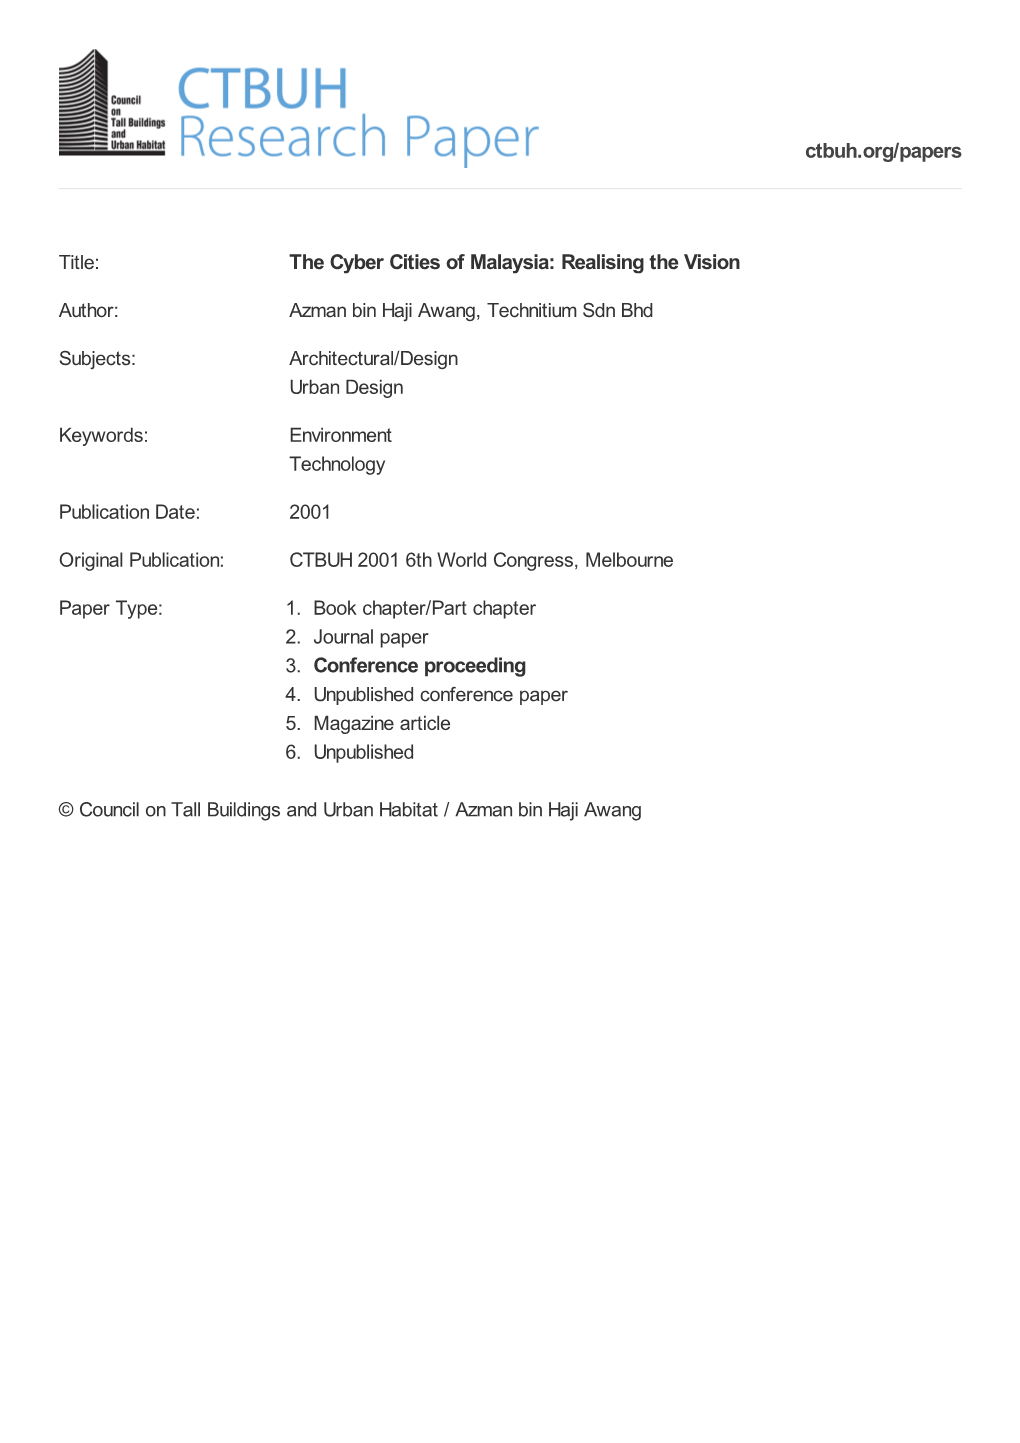 The Cyber Cities of Malaysia: Realising the Vision